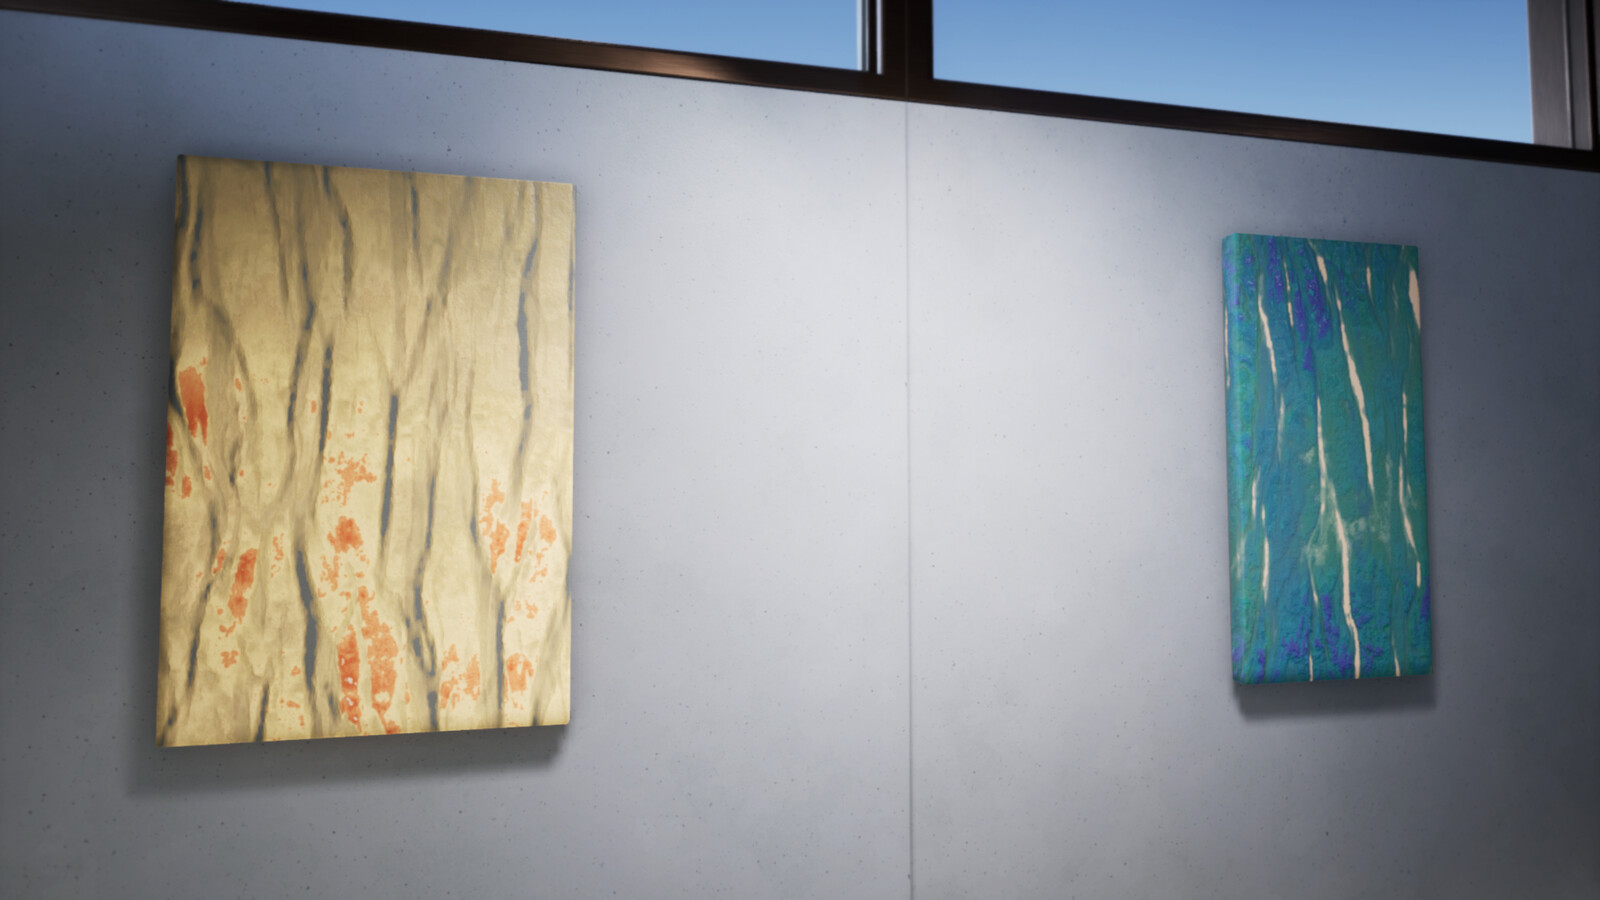 A few close-ups of the paintings in Unreal